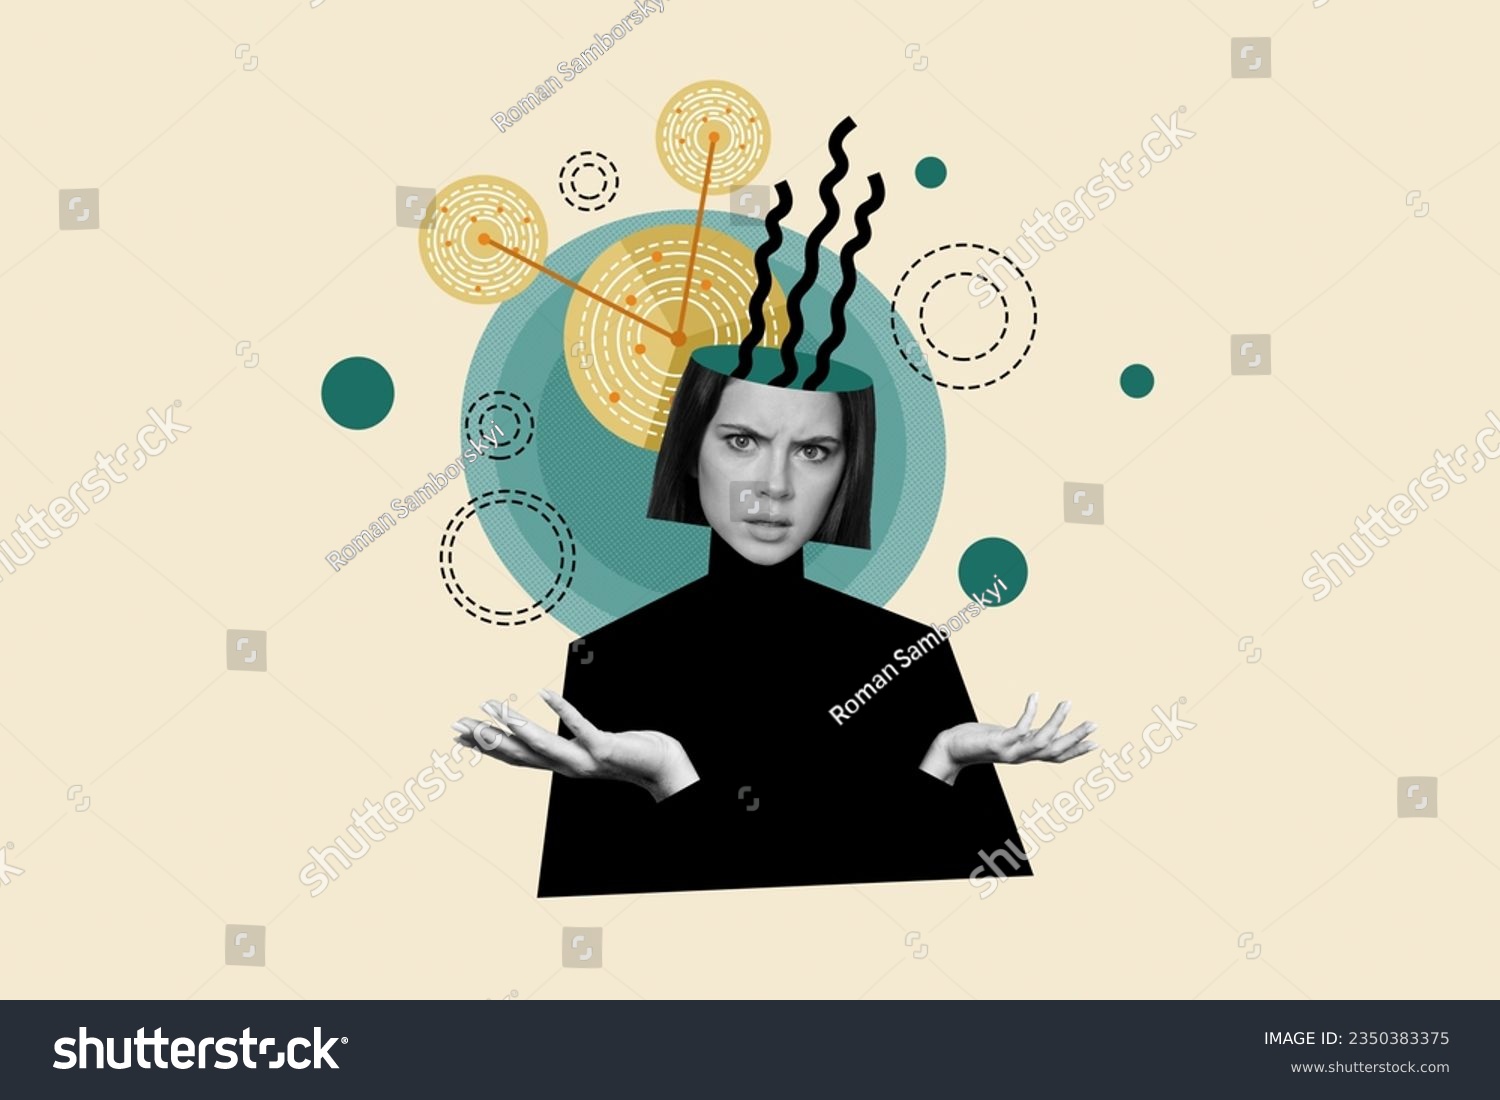 Creative composite photo illustration collage of puzzled confused woman asking question have no idea isolated on drawing background #2350383375